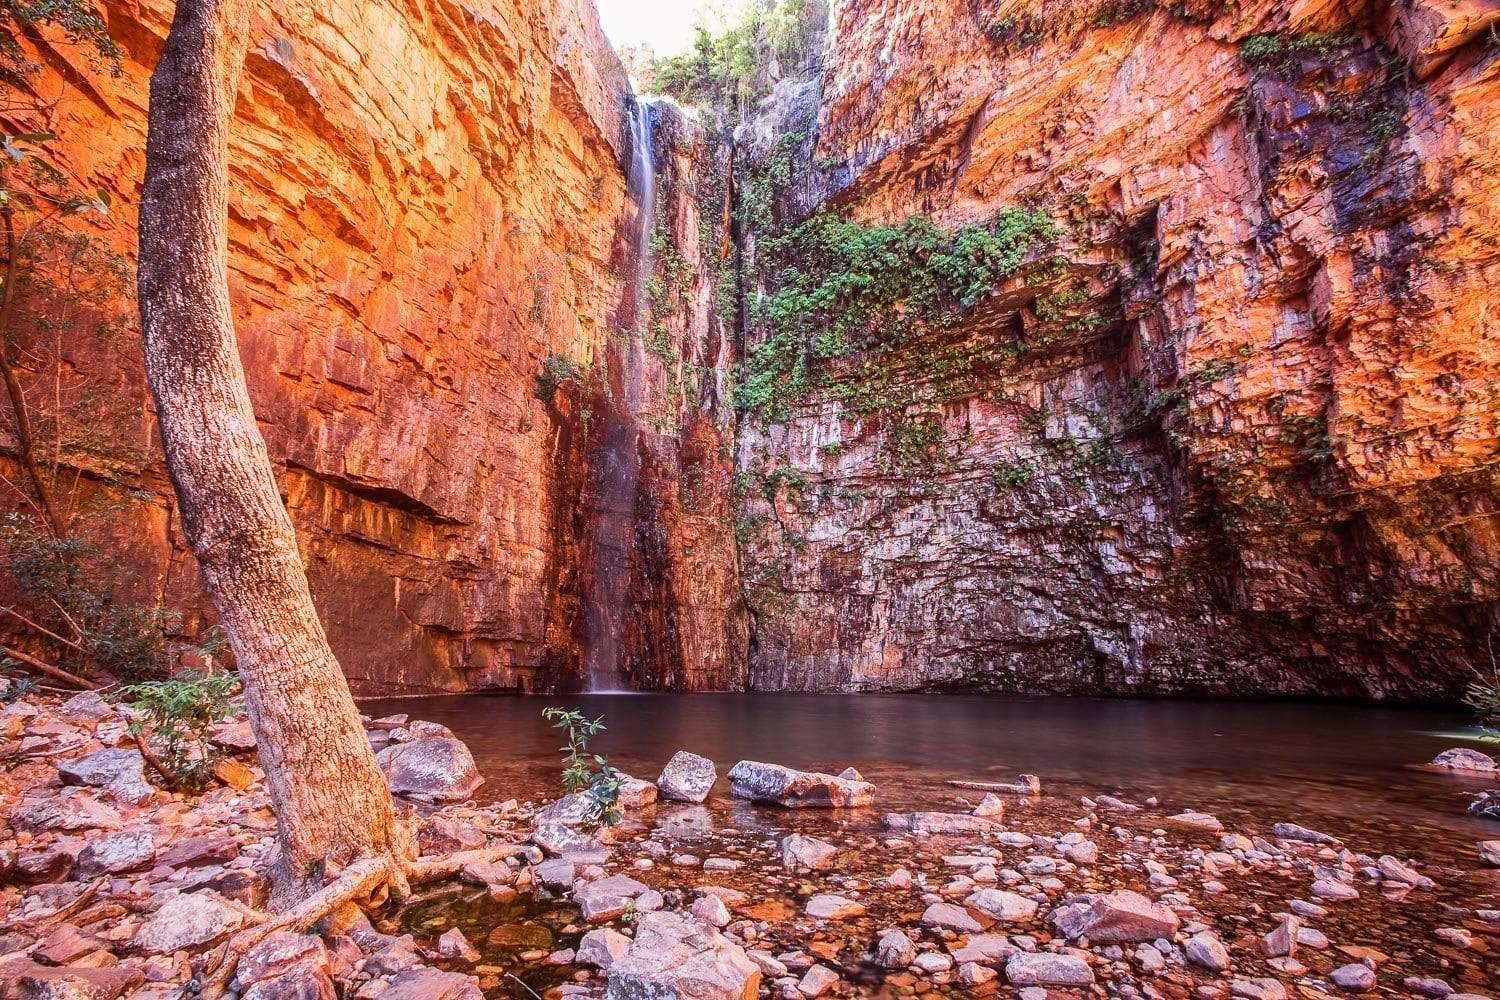 A beautiful area under two mountain walls of reddish shade, a small waterfall and a watercourse with a lot of stones on the corner, and a tree standing with no leaves, Emma Gorge, El Questro - The Kimberley WA